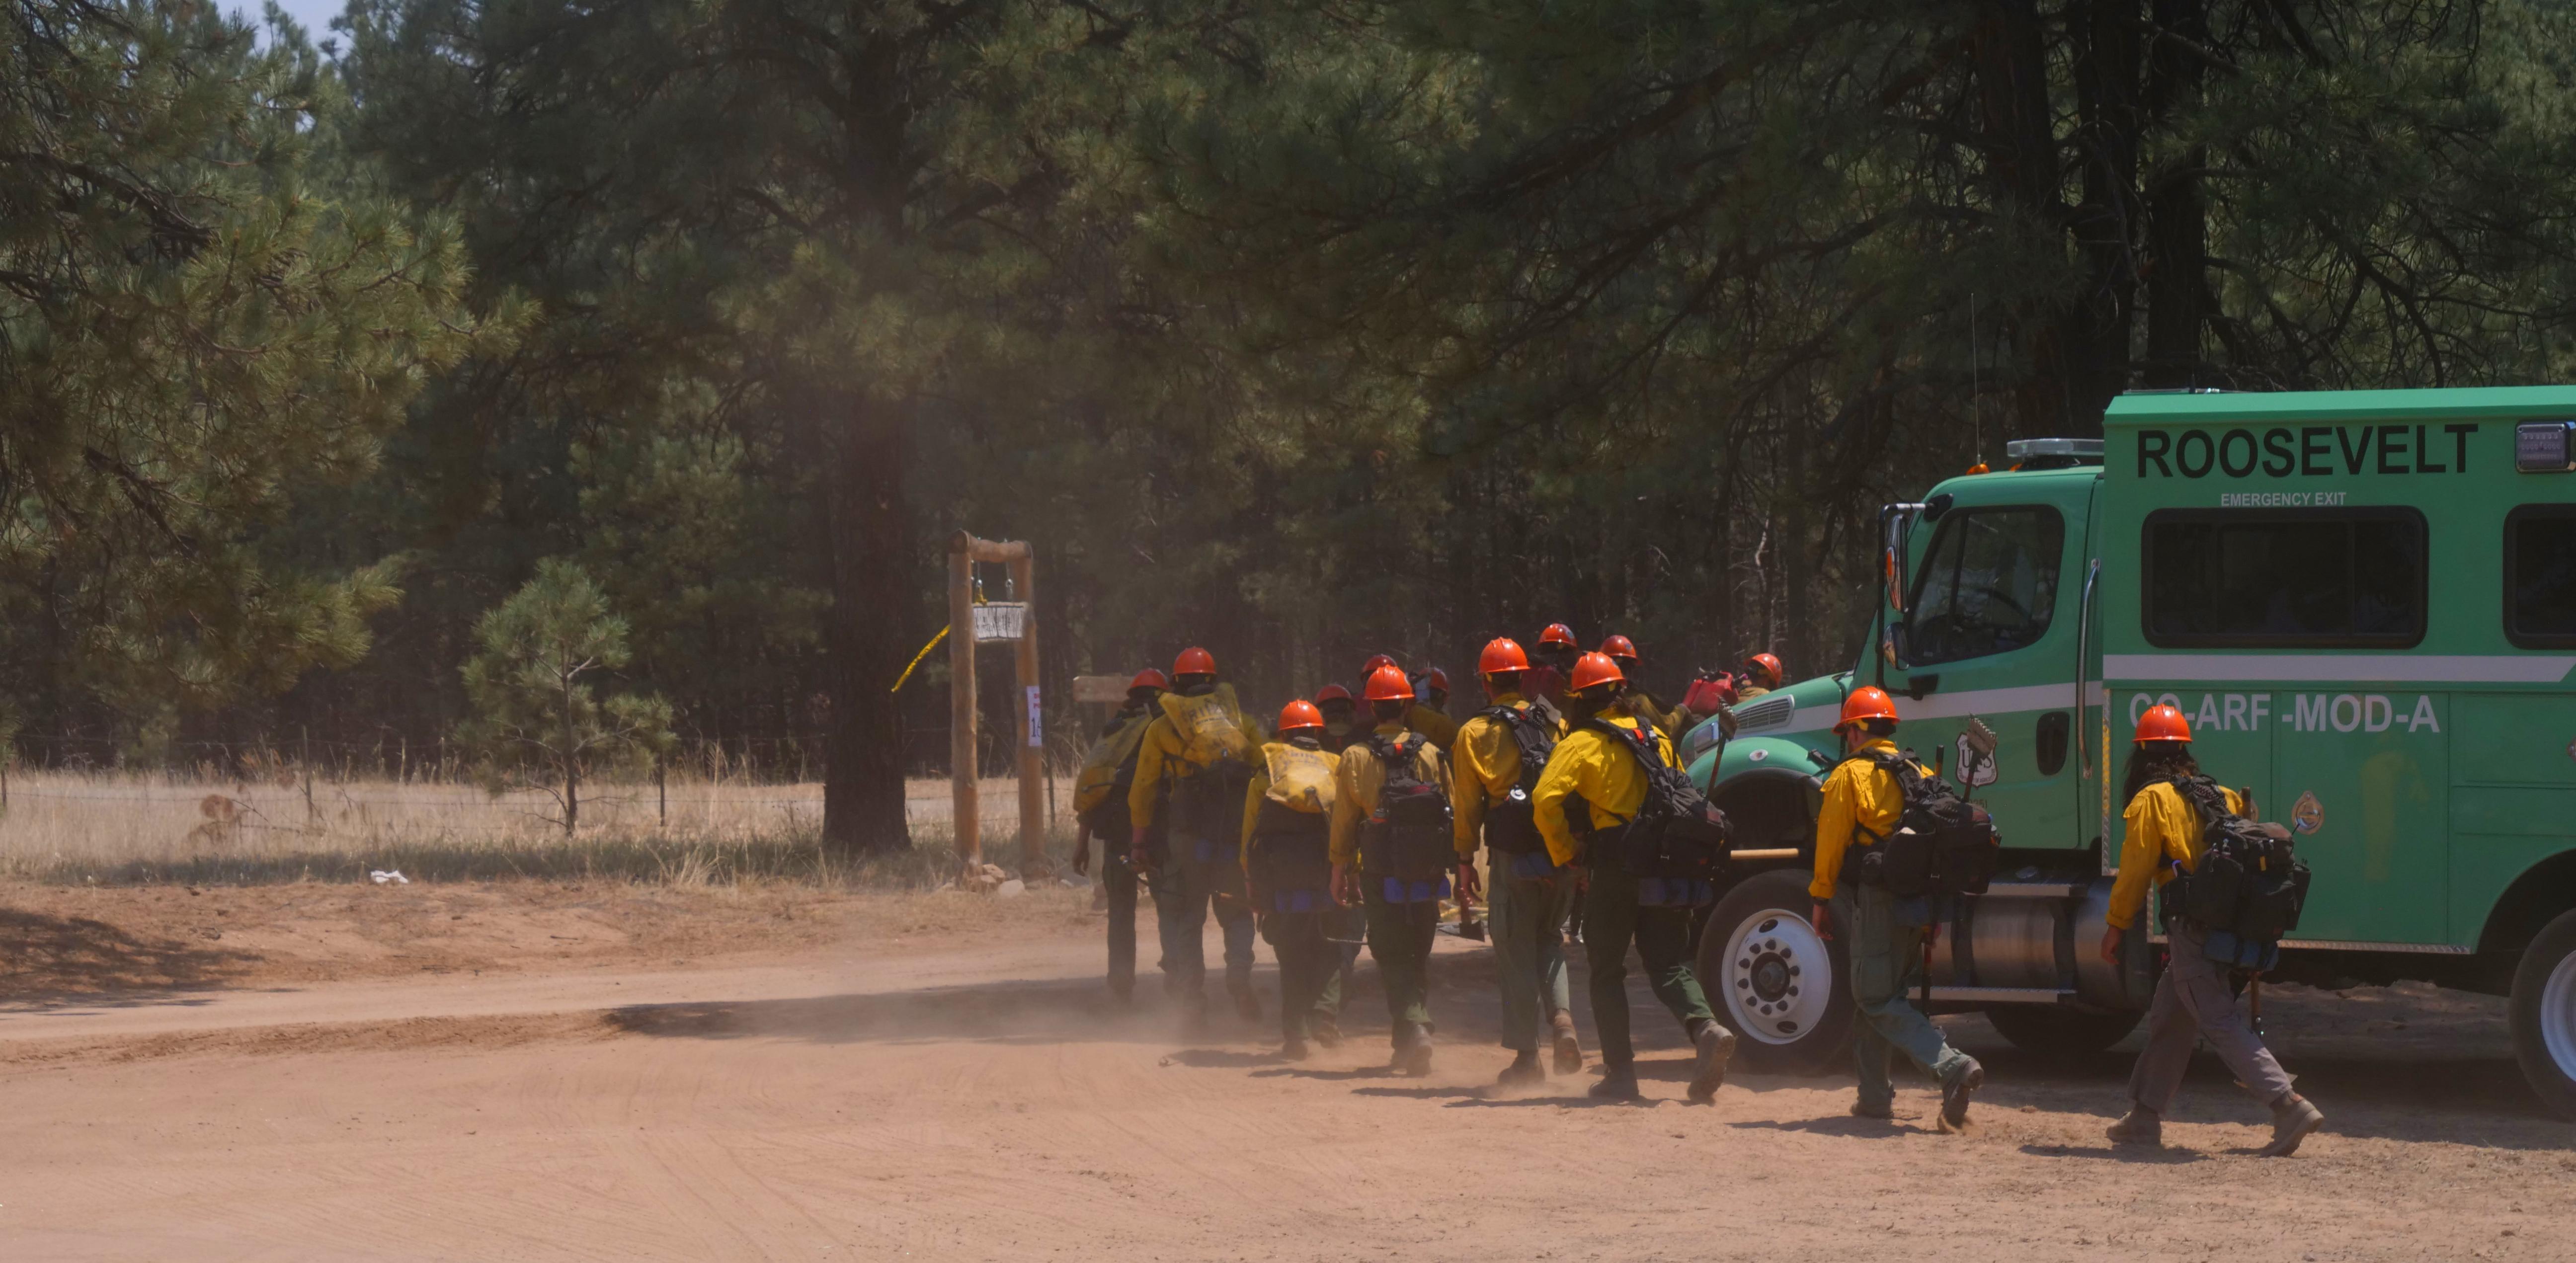 A group of firefighters in yellow shirts, orange helmets and other protective gear and tools in their hands, prepare to fight a forest fire.